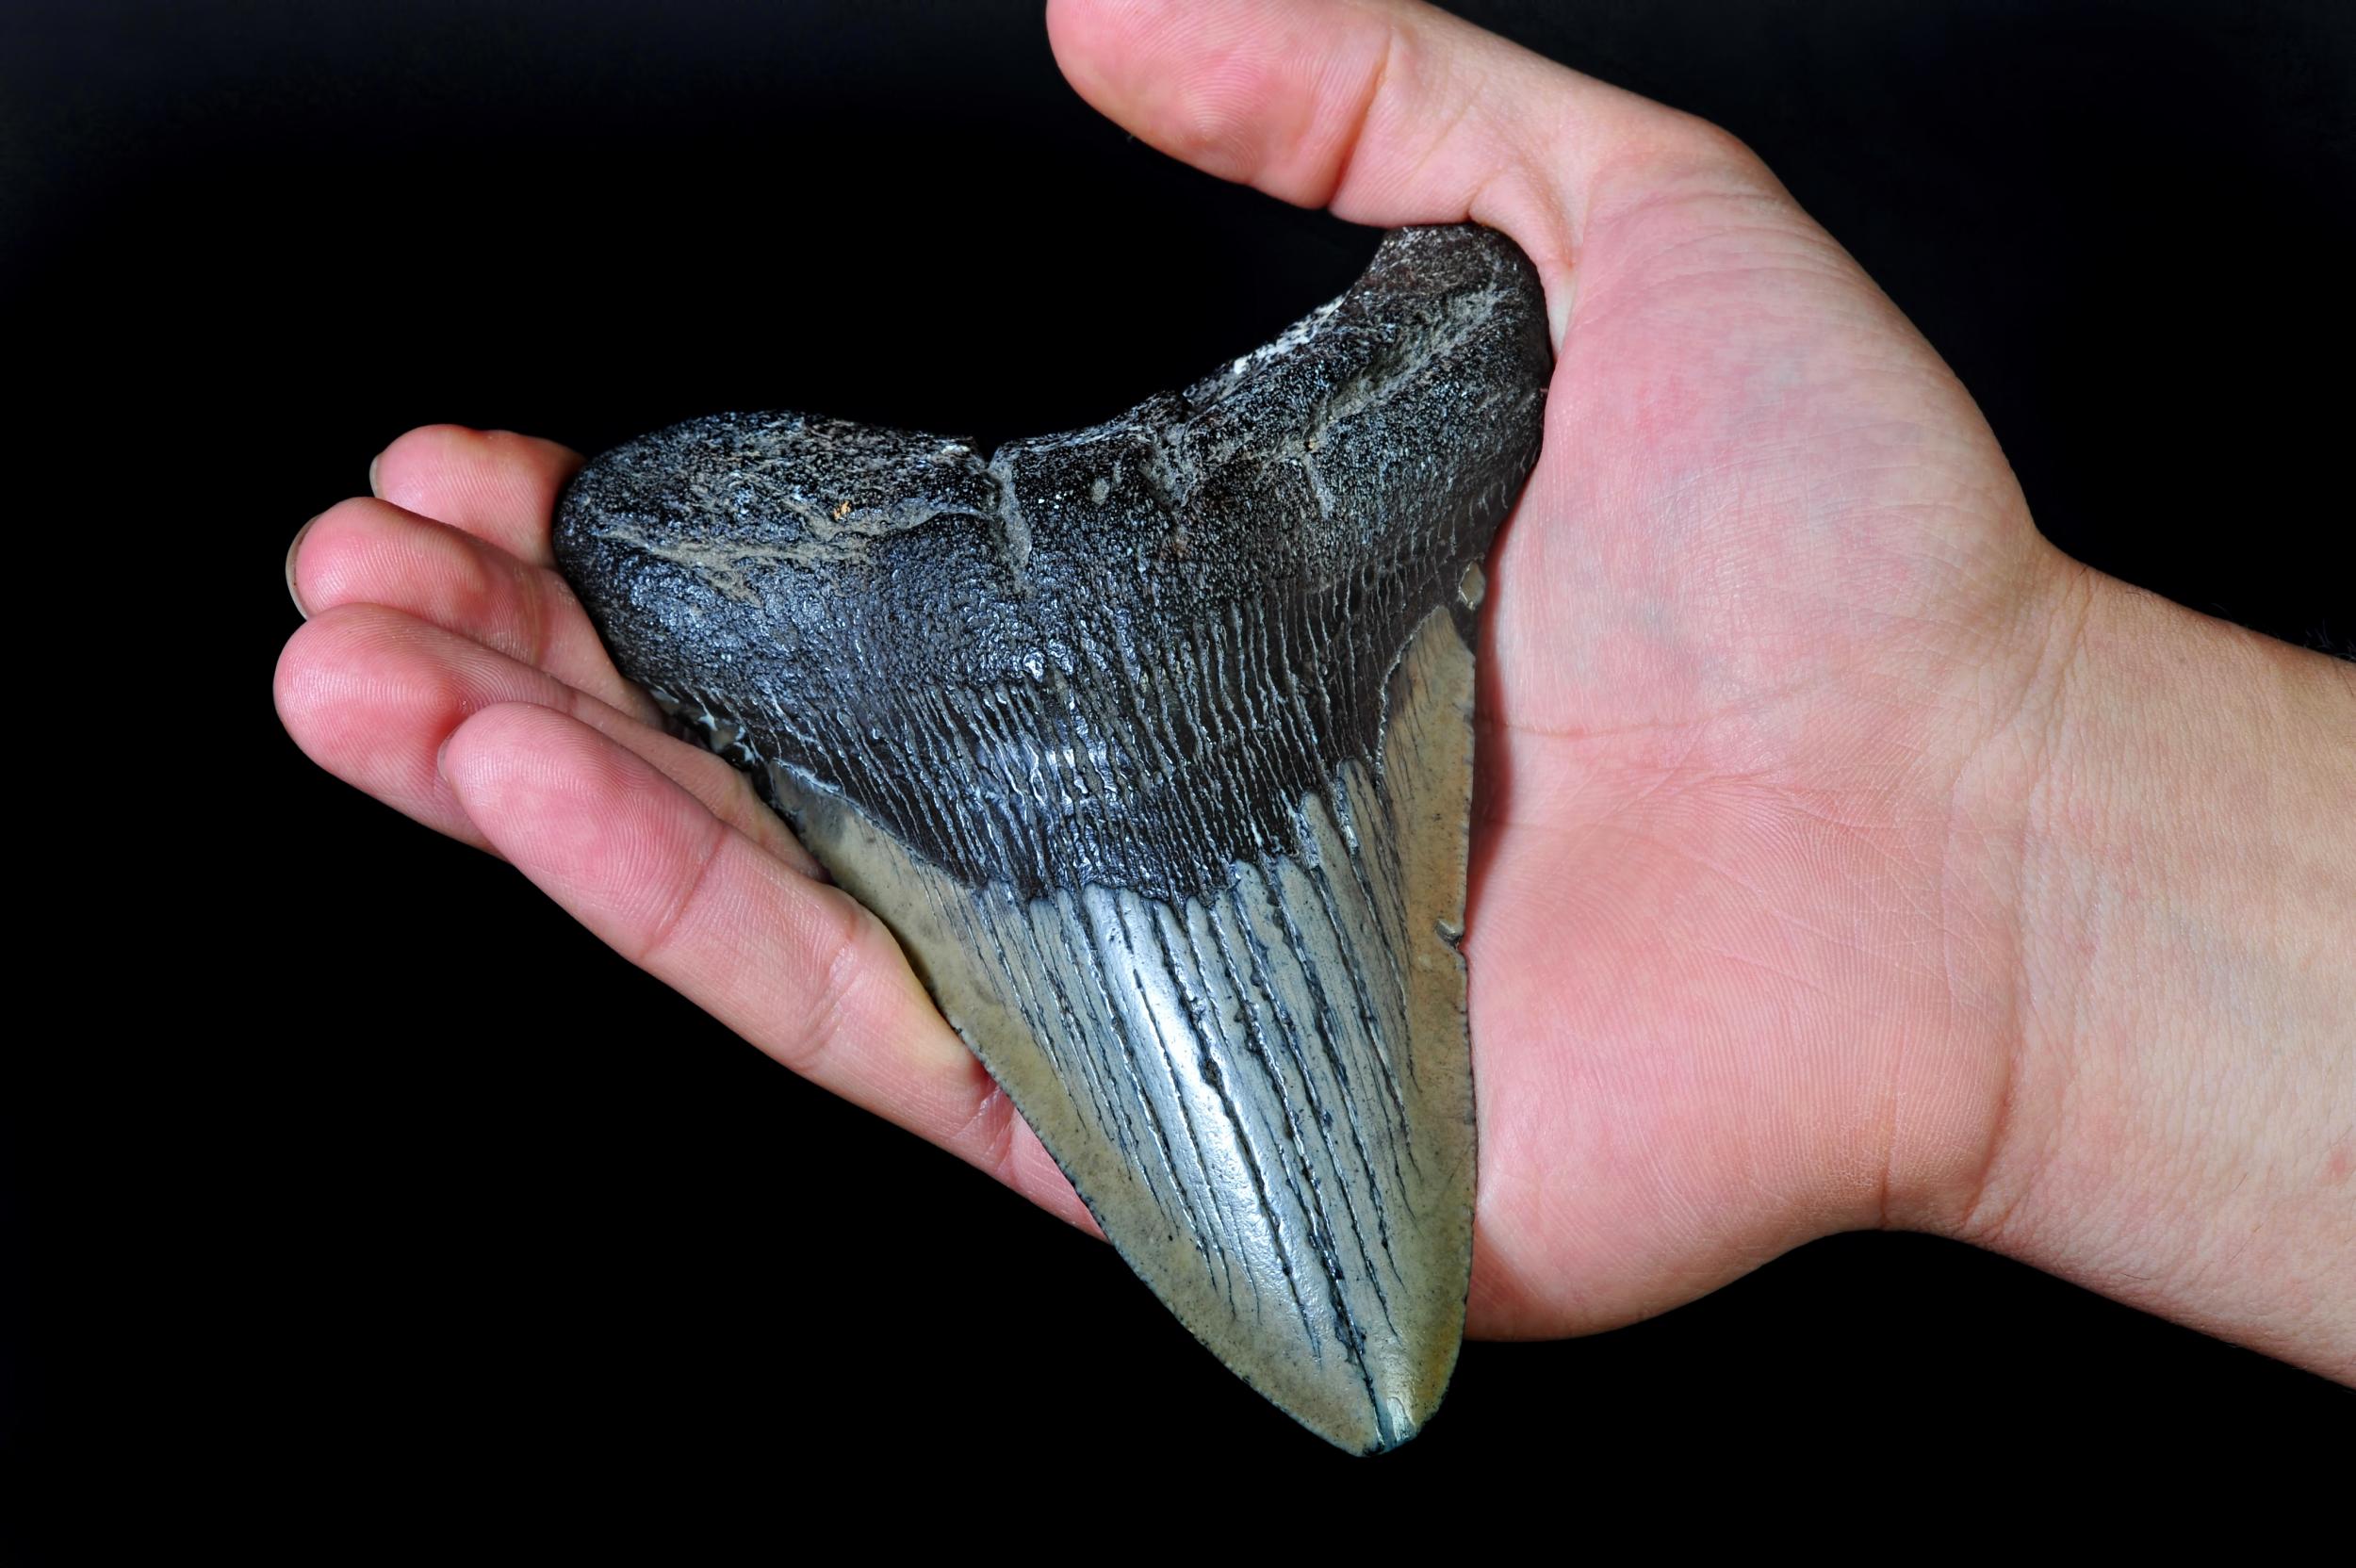 A huge fossilised megalodon tooth